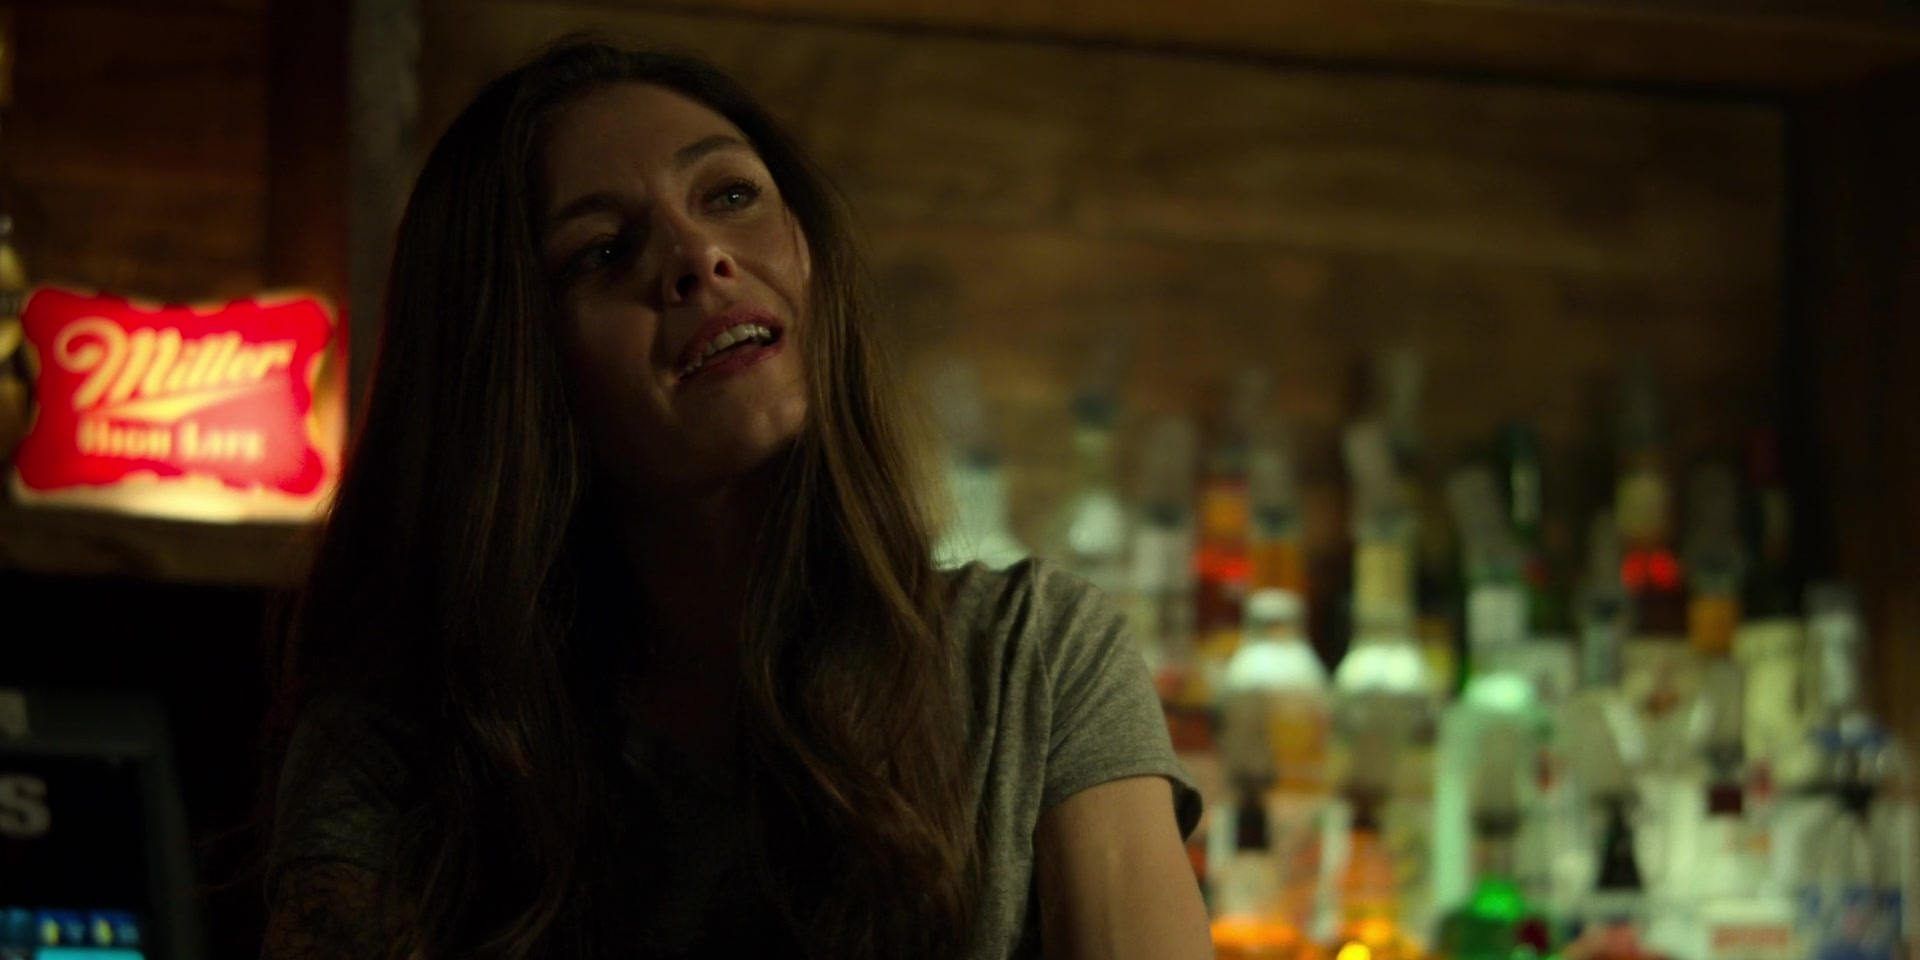 Beth at the bar in Punisher season 2